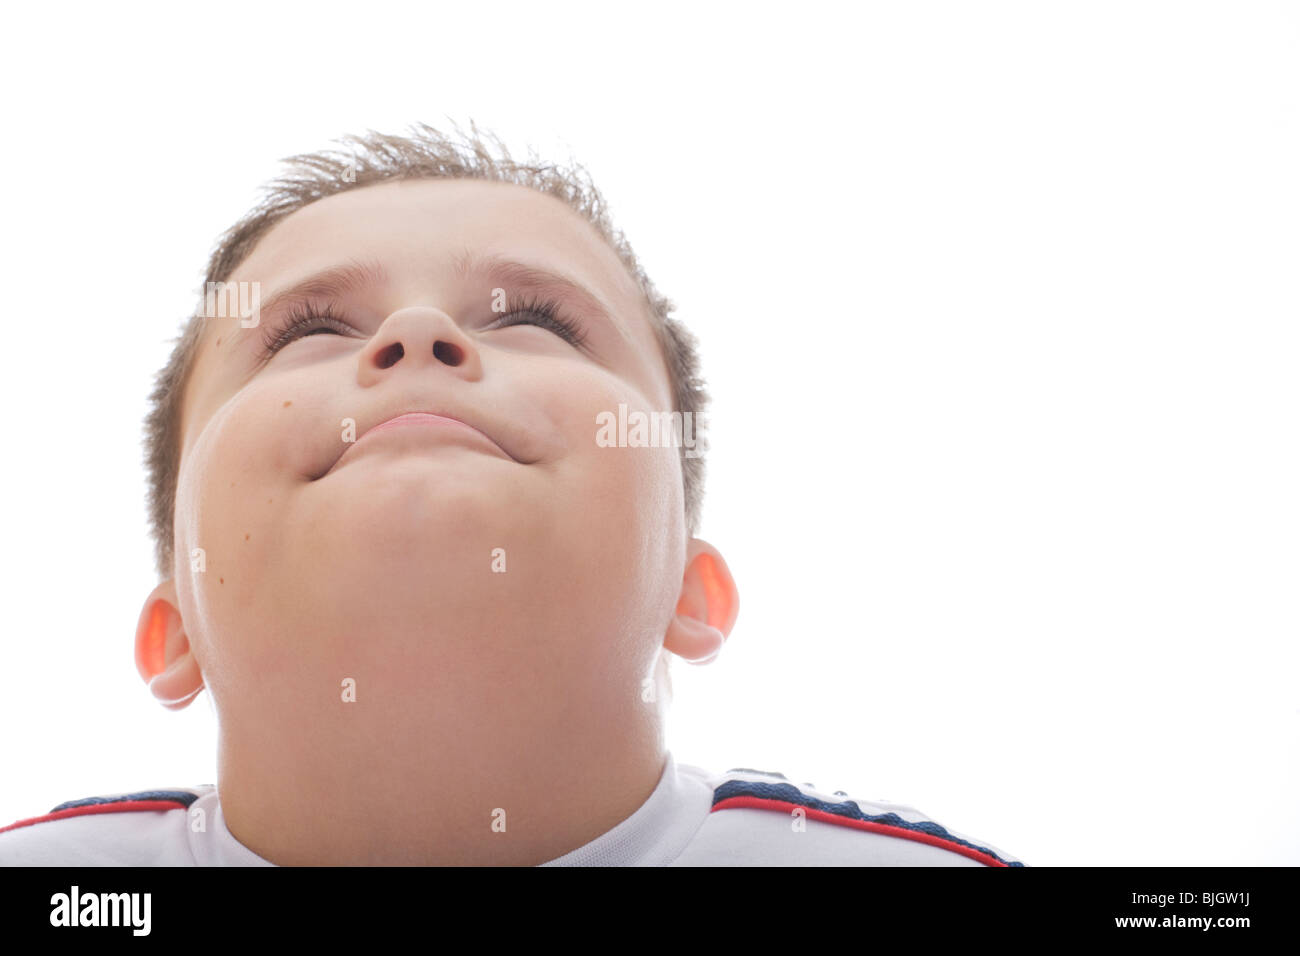 A young boy looking up smiling wearing a football shirt. Stock Photo